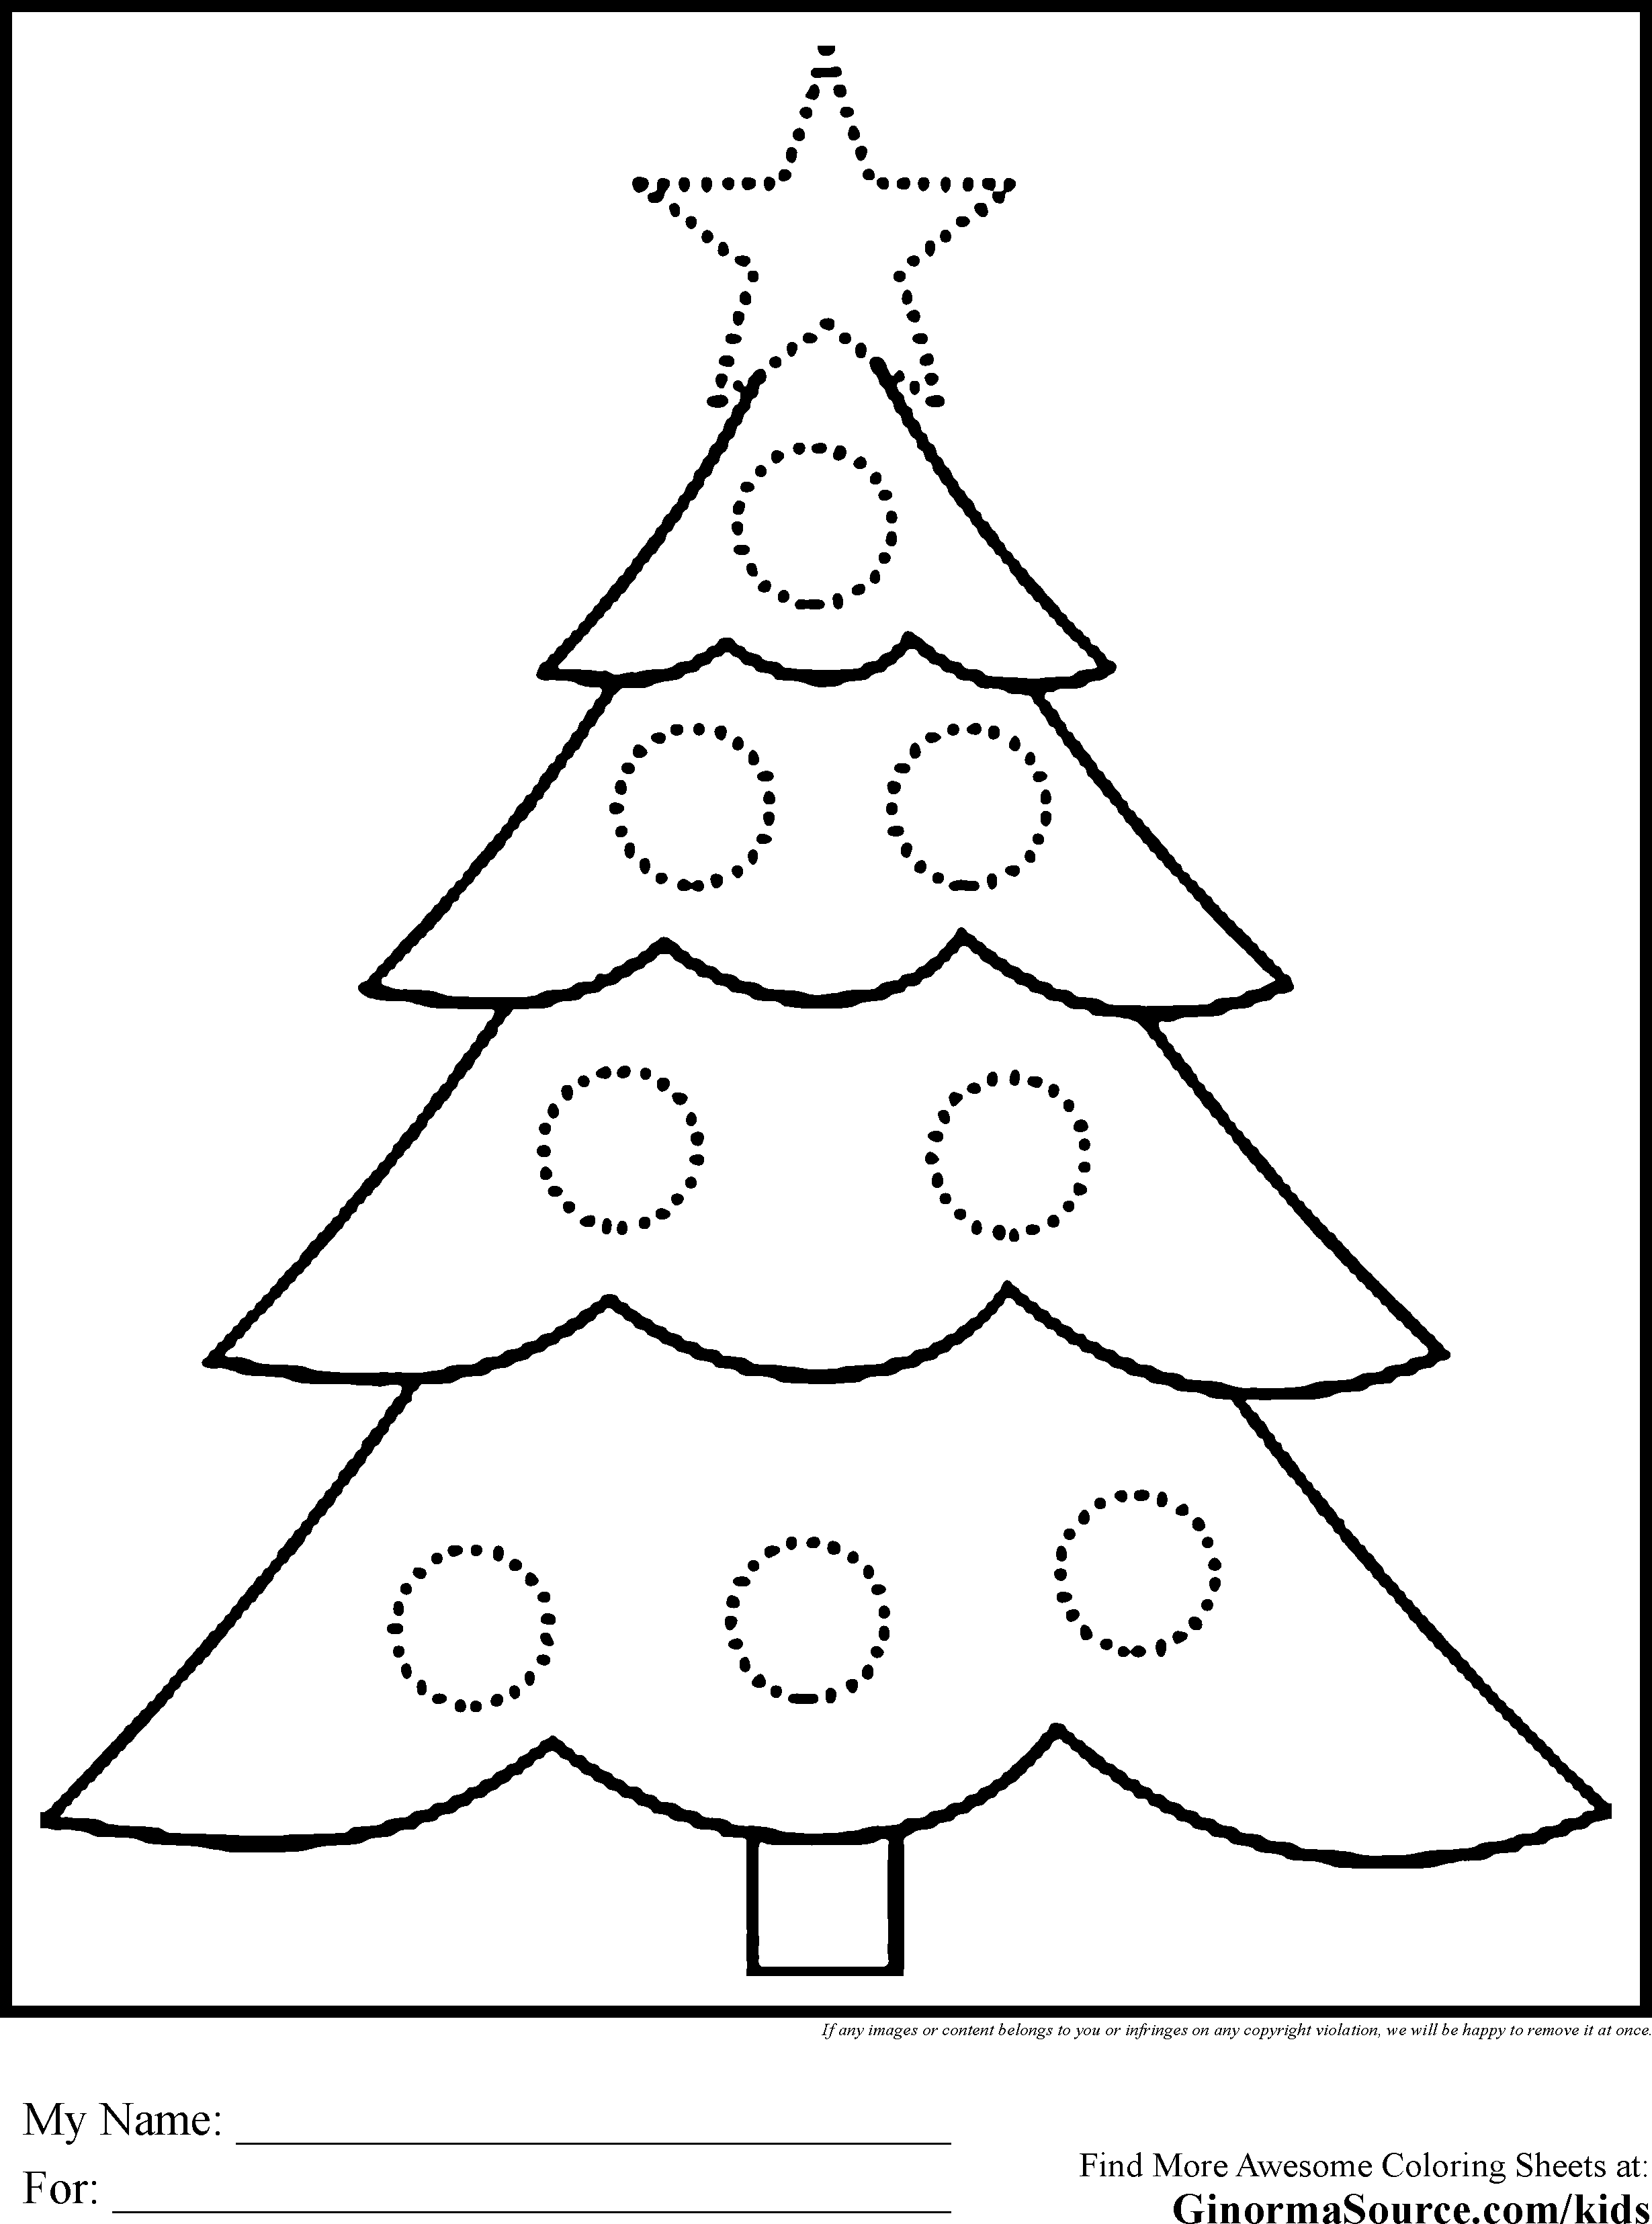 913 Cartoon Giant Christmas Tree Coloring Pages with Printable